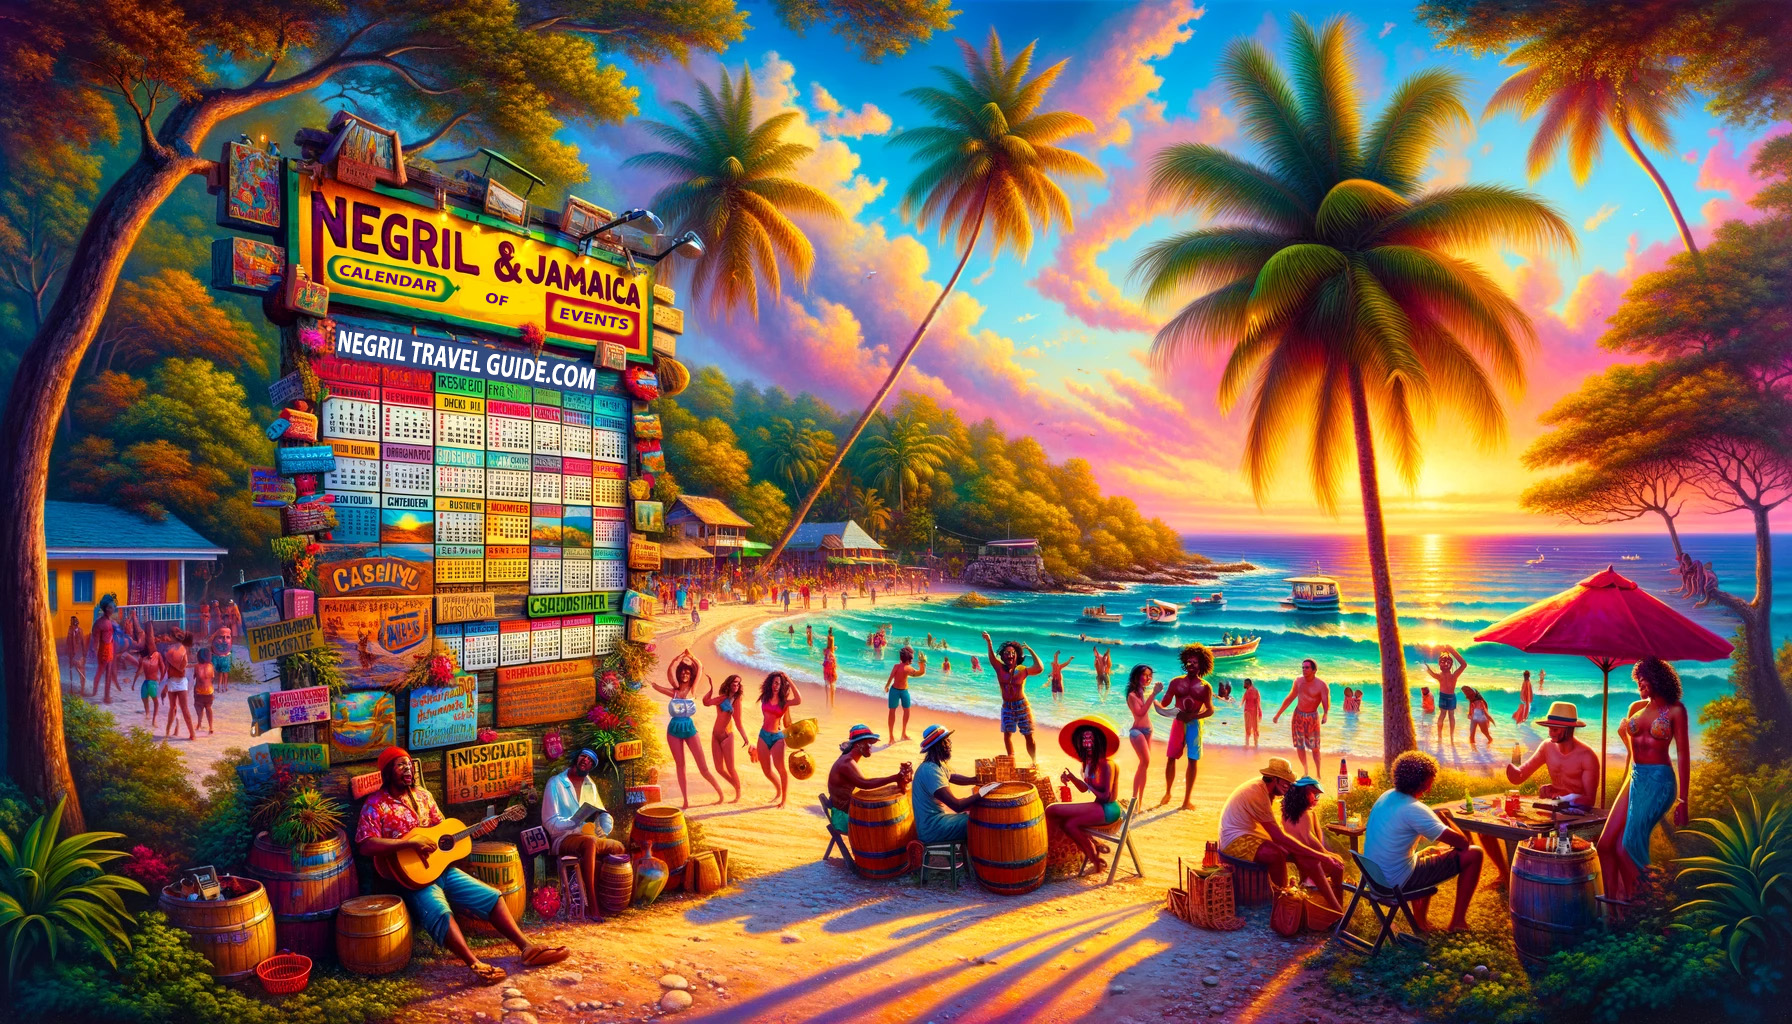 Negril - Jamaica Calendar Of Events - Negril Travel Guide